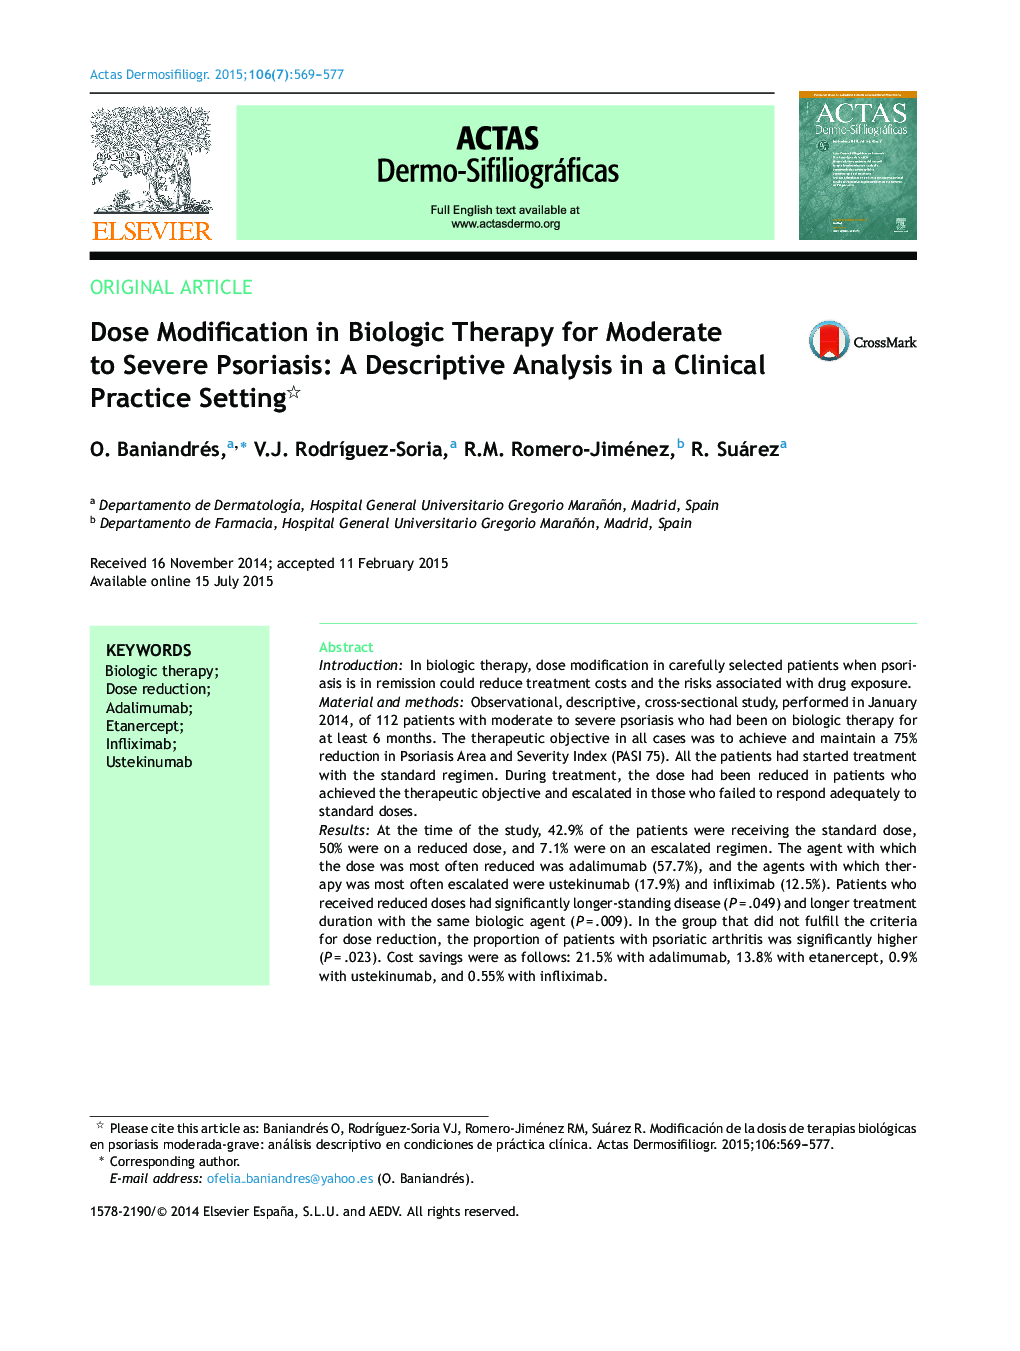 Dose Modification in Biologic Therapy for Moderate to Severe Psoriasis: A Descriptive Analysis in a Clinical Practice Setting 